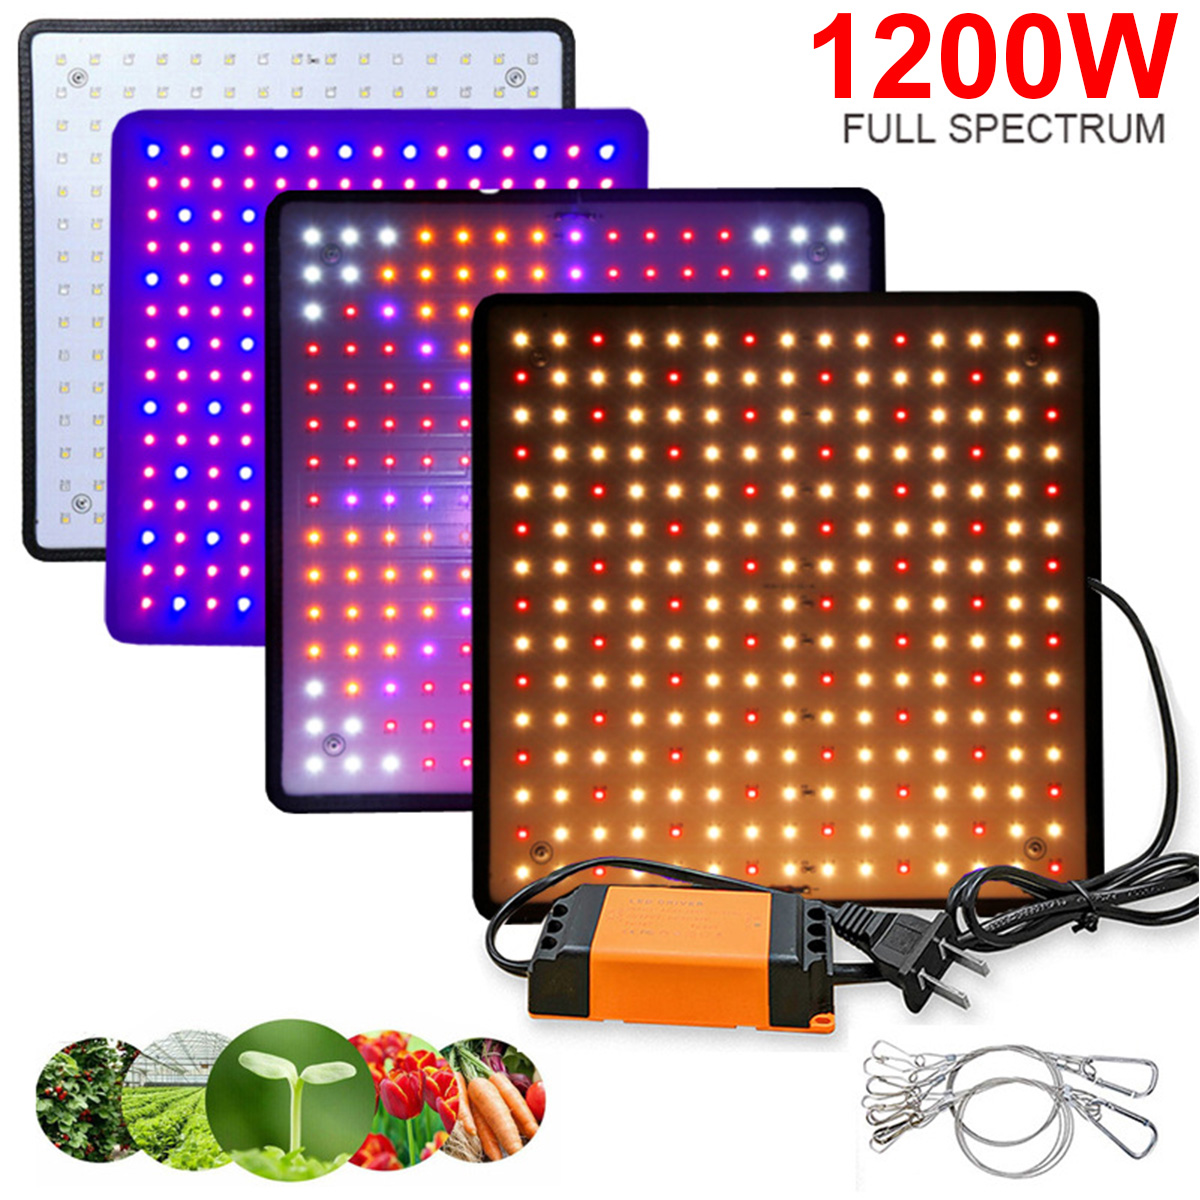 1200W-LED-Grow-Light-Bulb-Plant-Lamp-Panel-for-Indoor-Hydroponic-Flower-Vegetable-1794819-1